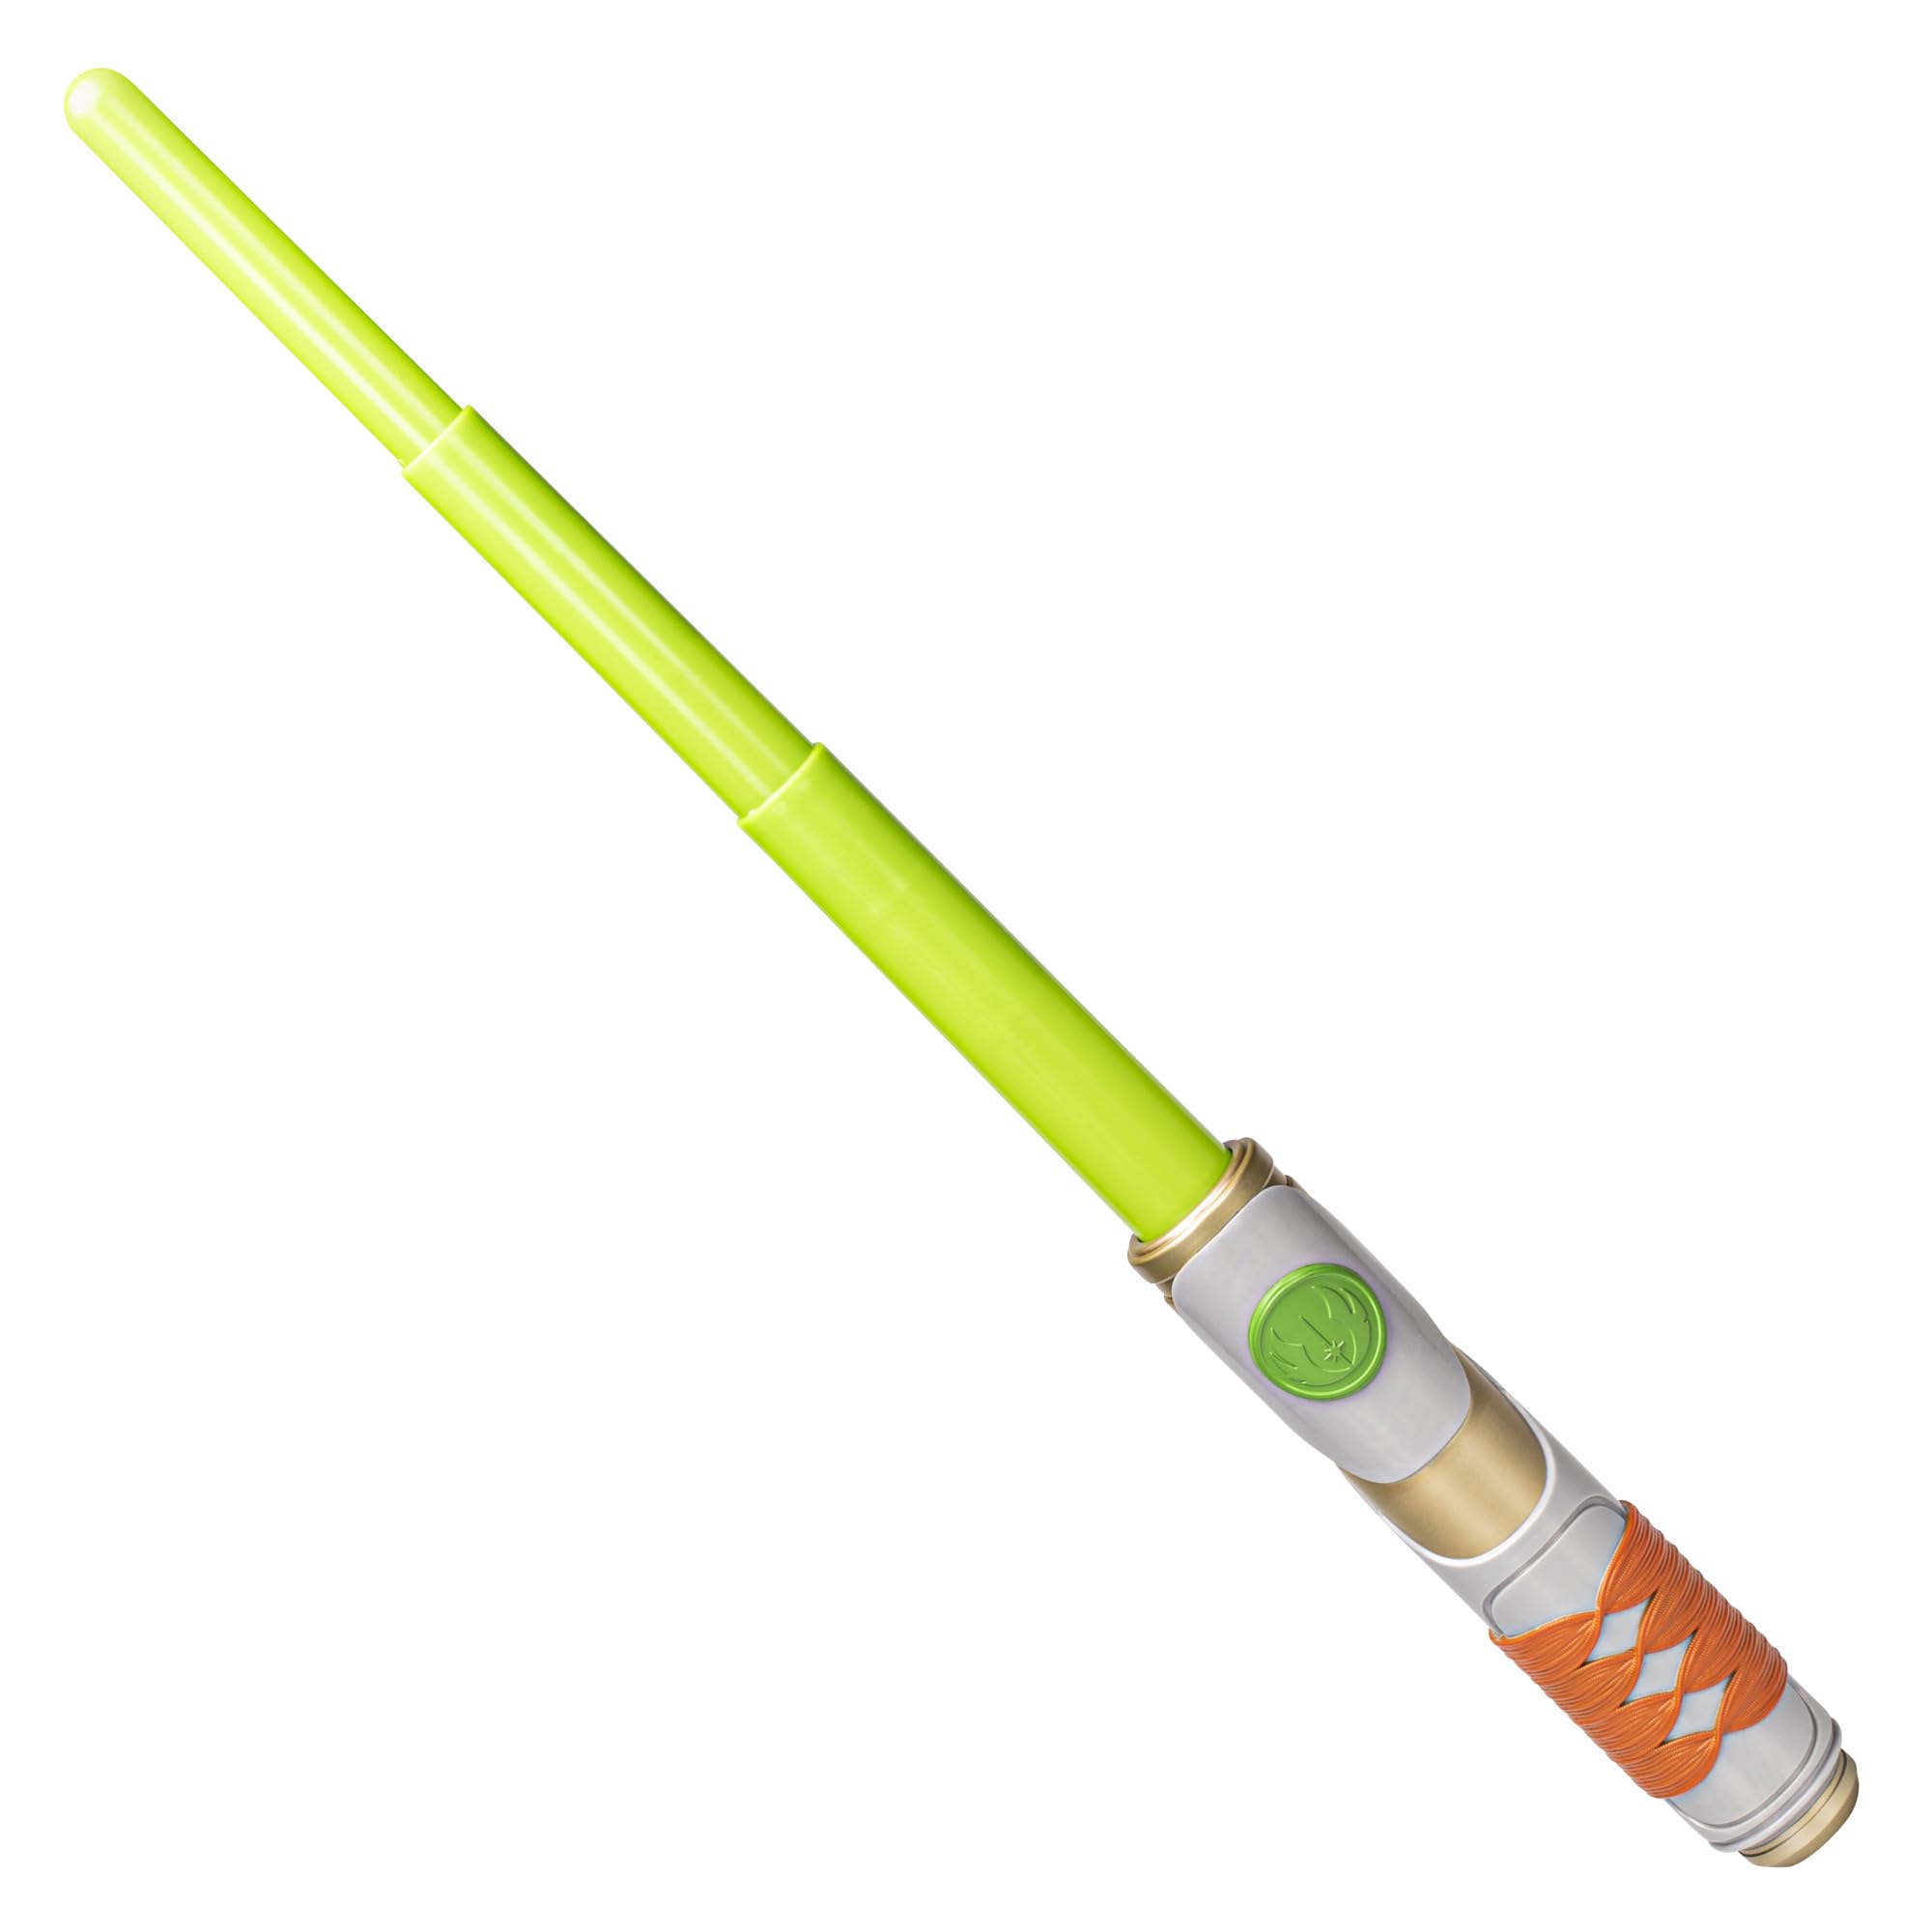 STAR WARS Young Jedi Adventures, Kai Brightstar Green Extendable Lightsaber, Toys, Preschool Toys for 3 Year Old Boys & Girls